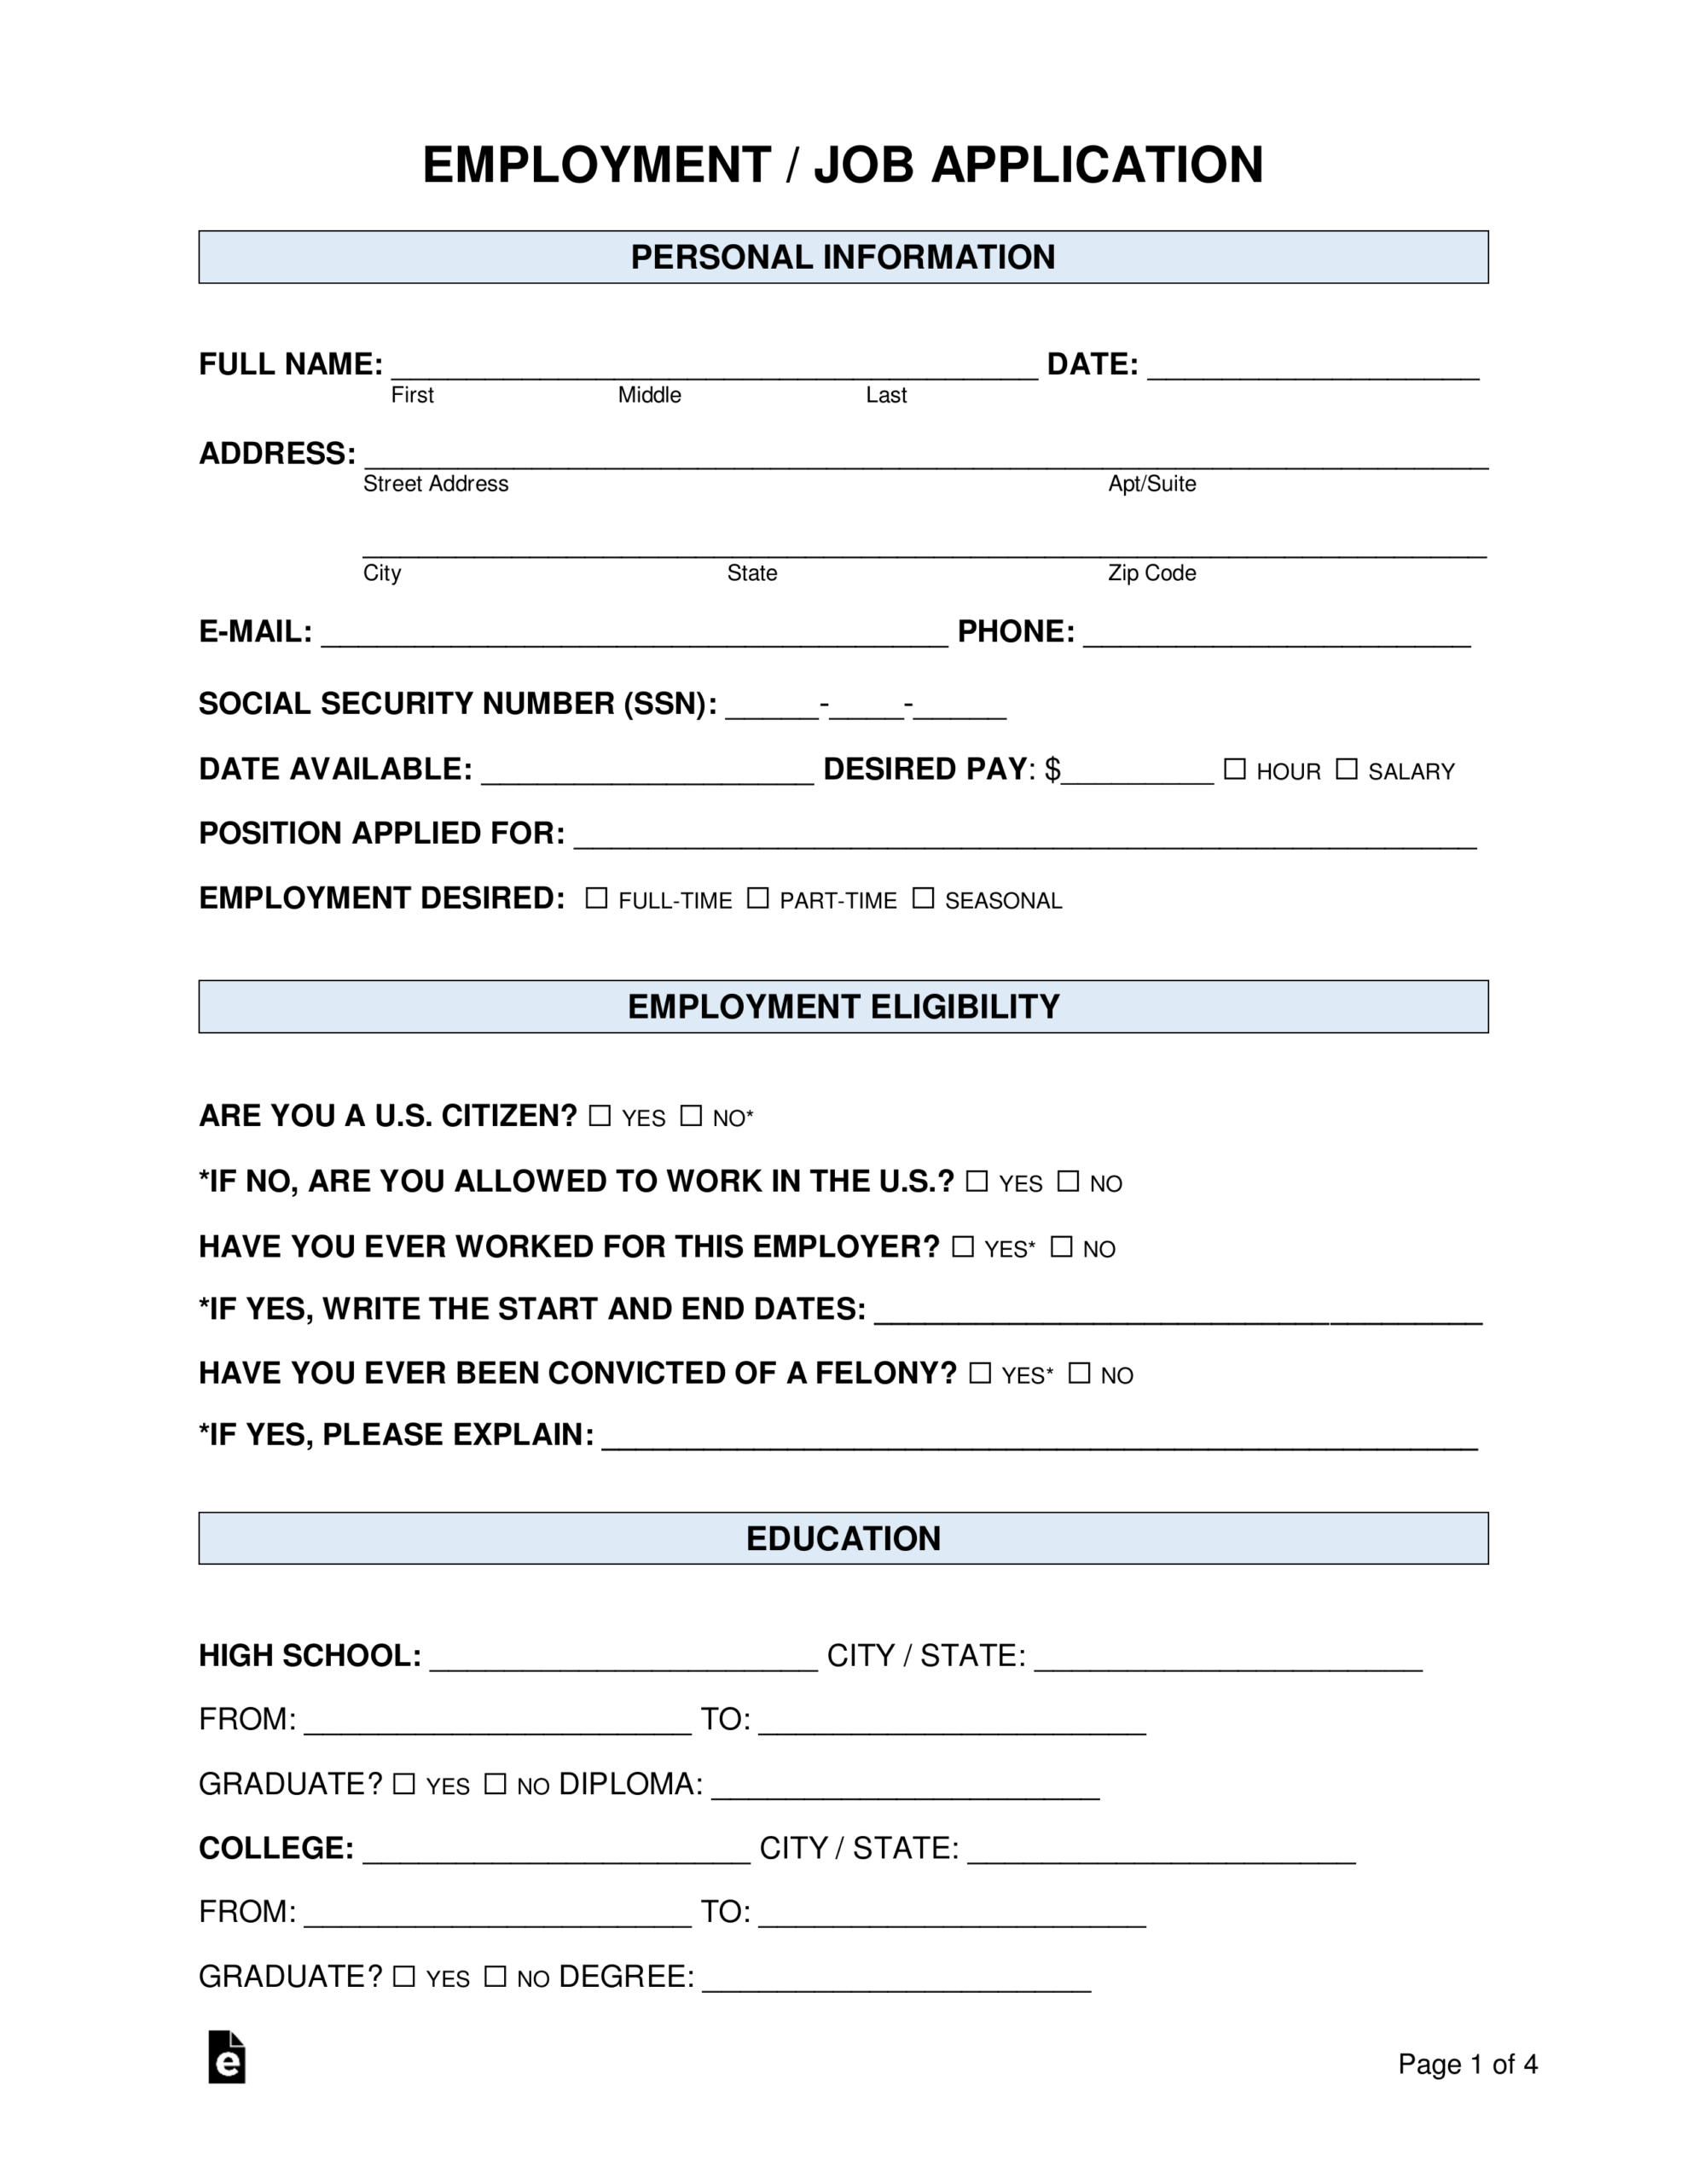 Free Job Application Form – Standard Template – Word | Pdf Within Employment Application Template Microsoft Word